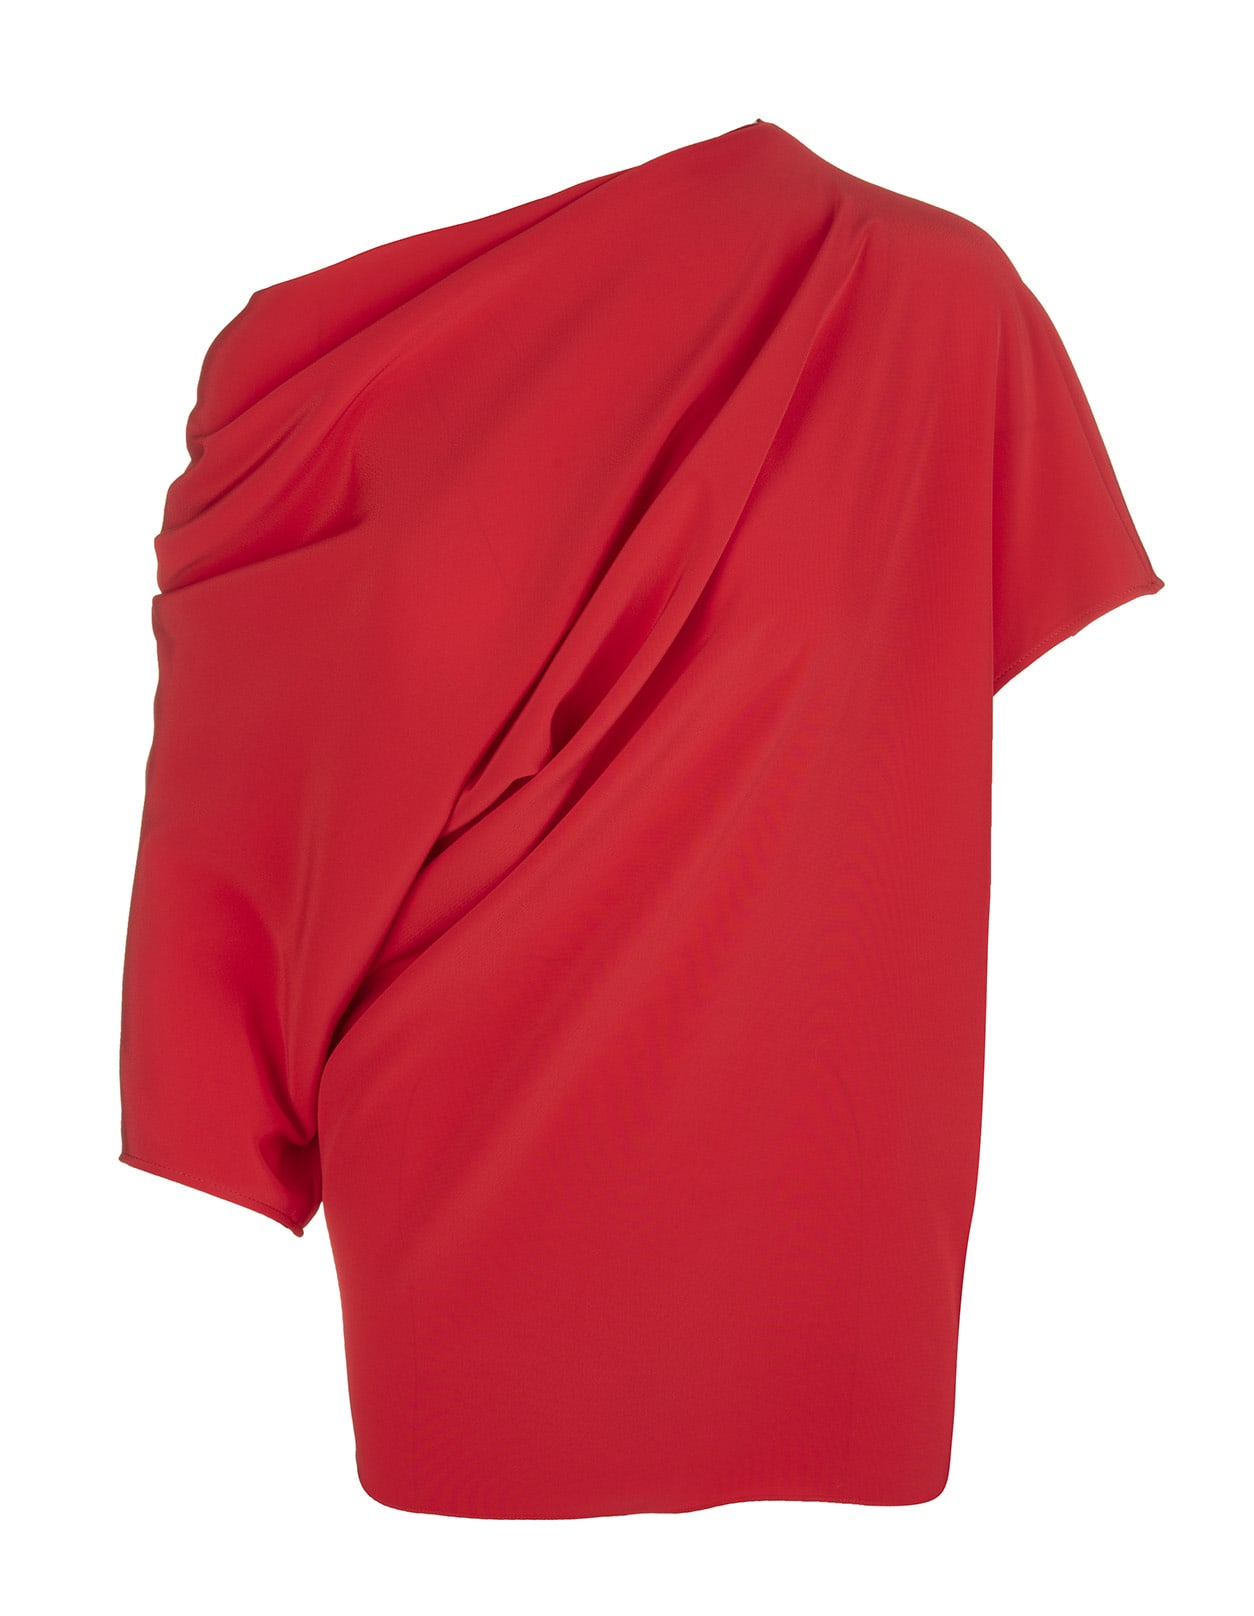 Red Asymmetric Ruched Top From Gianluca Capannolo Featuring Asymmetric Design, Ruched Detailing And Three-quarter Length Sleeves.